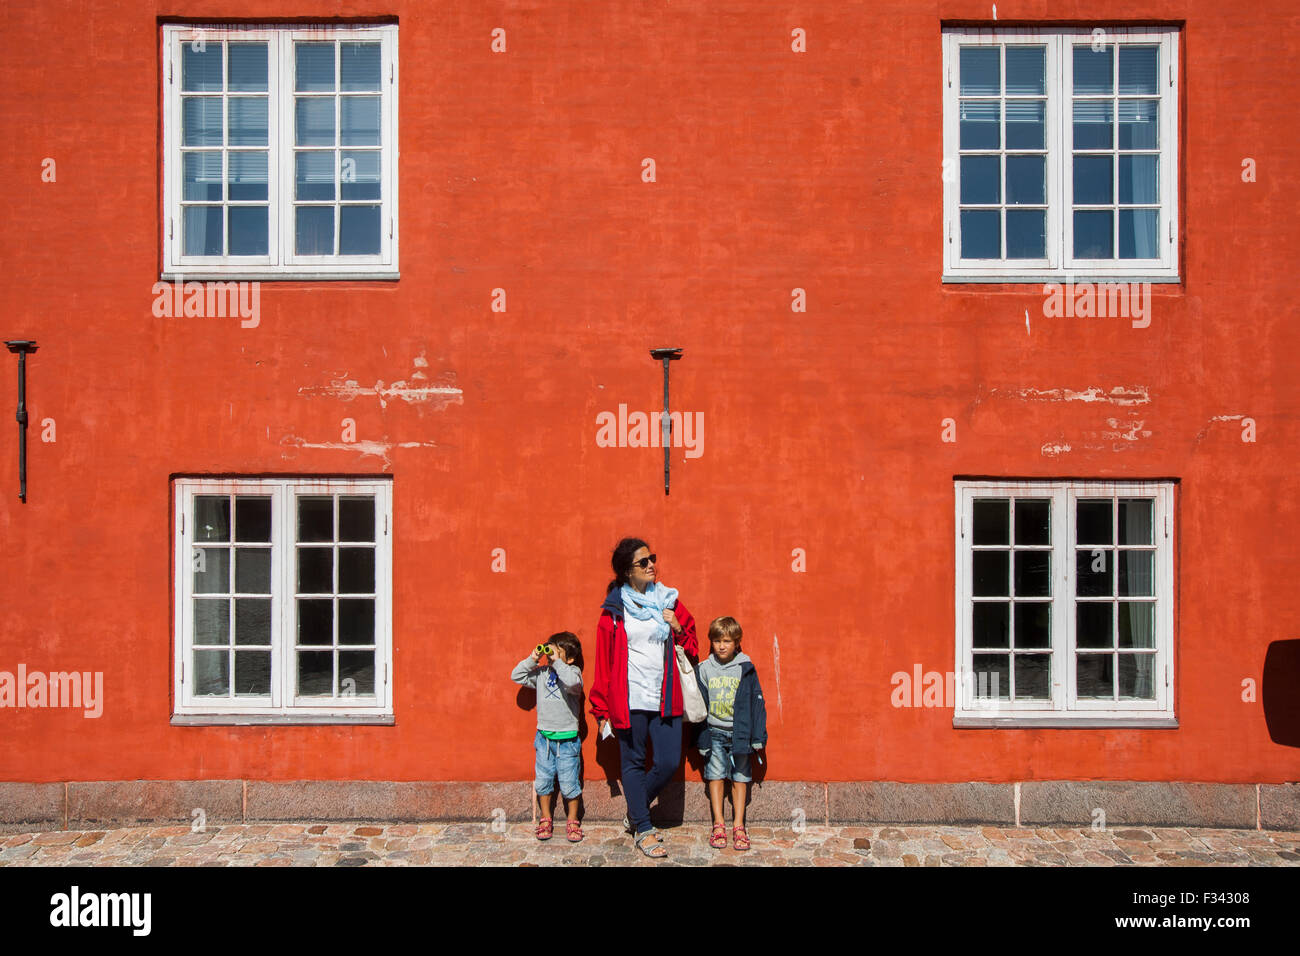 Copenhagen, Denmark -18 Aug 2015- Mother and two child on a red wall at the Kastellet military fotification. Stock Photo